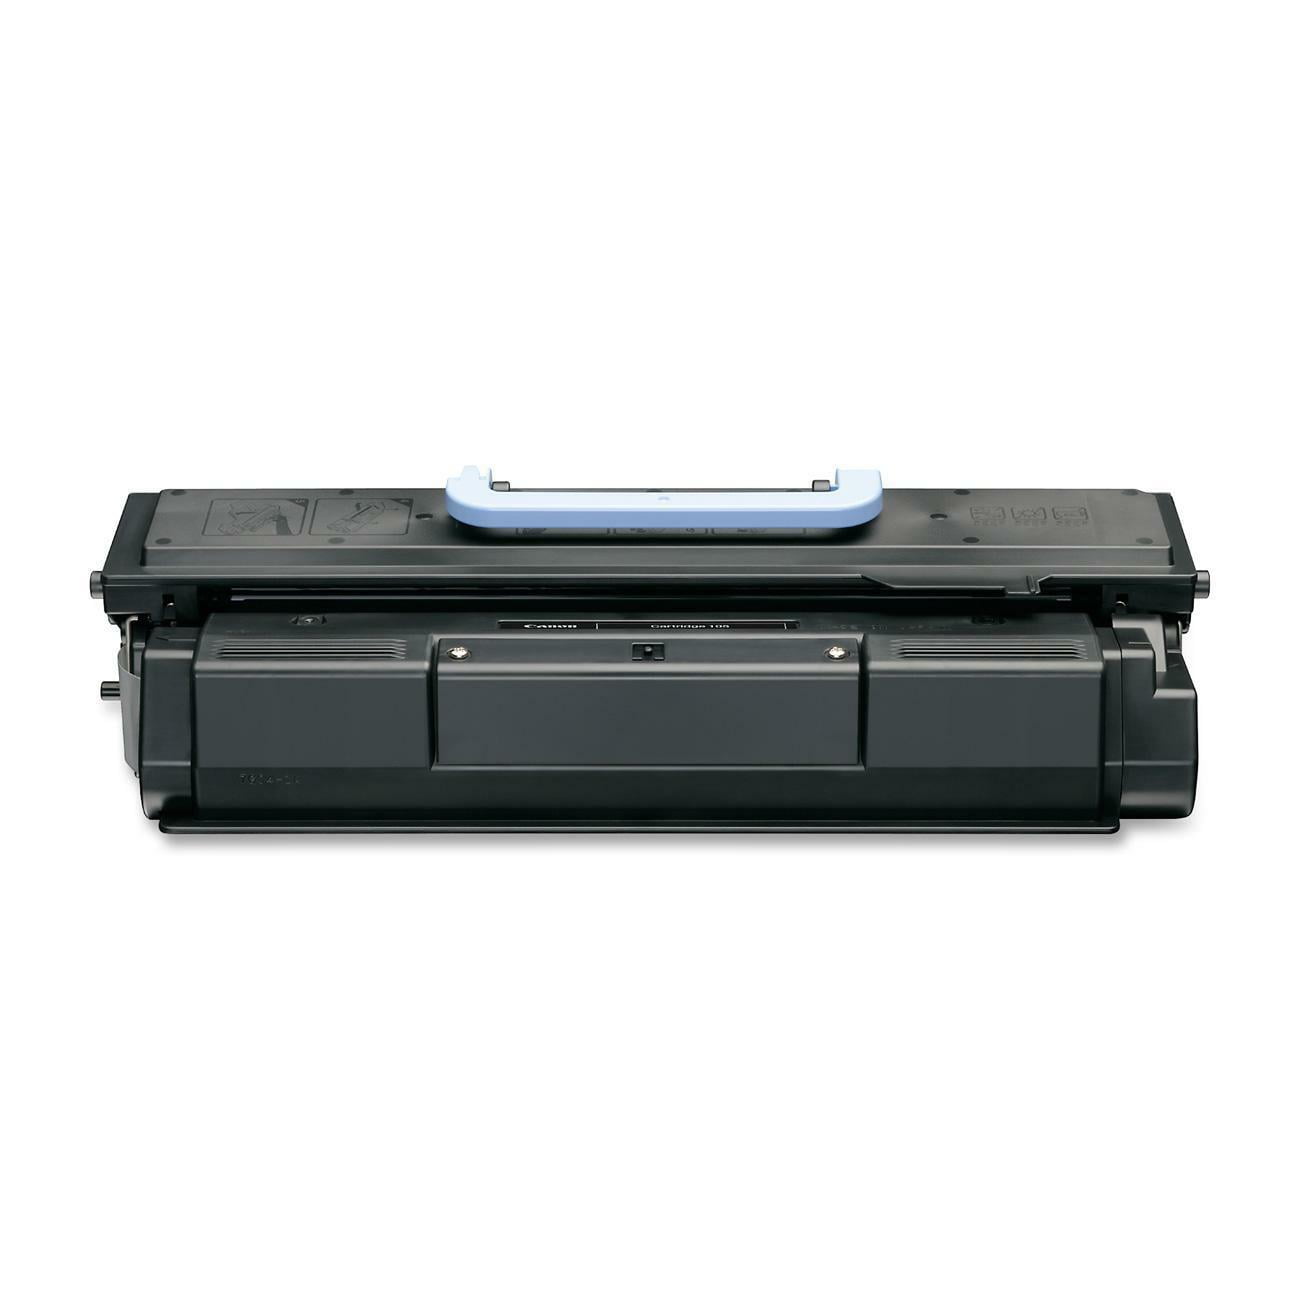 Canon Toner For Image Class MF7280 10000 Page Yield Black CARTRIDGE105 ...